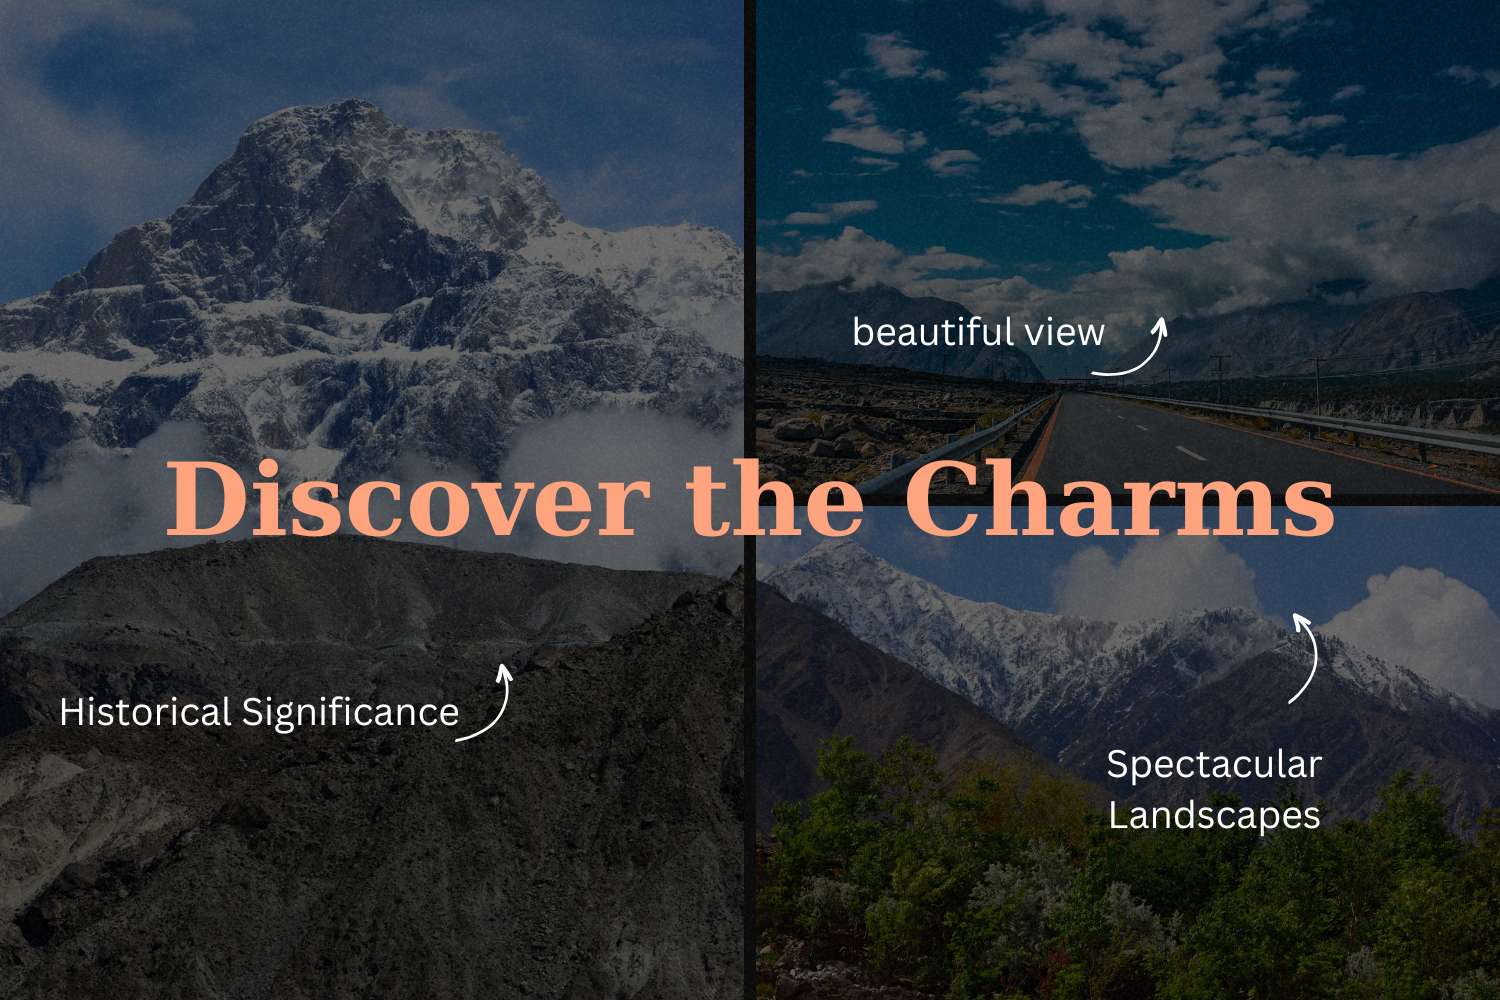 Discover the Charms 5 Reasons to Take a Cultural Tour of Karakoram